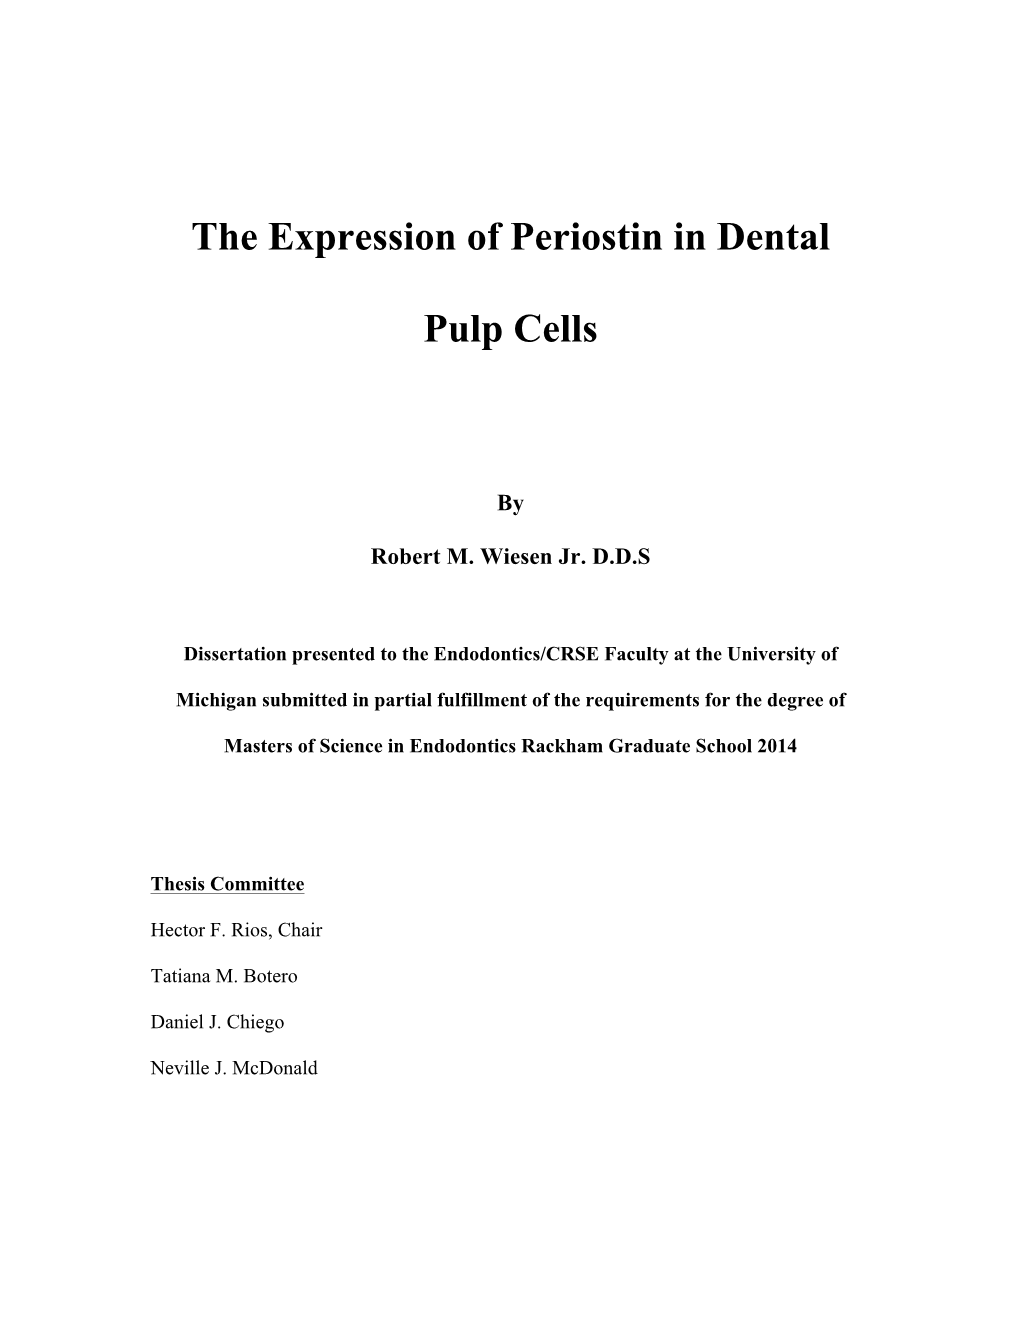 The Expression of Periostin in Dental Pulp Cells